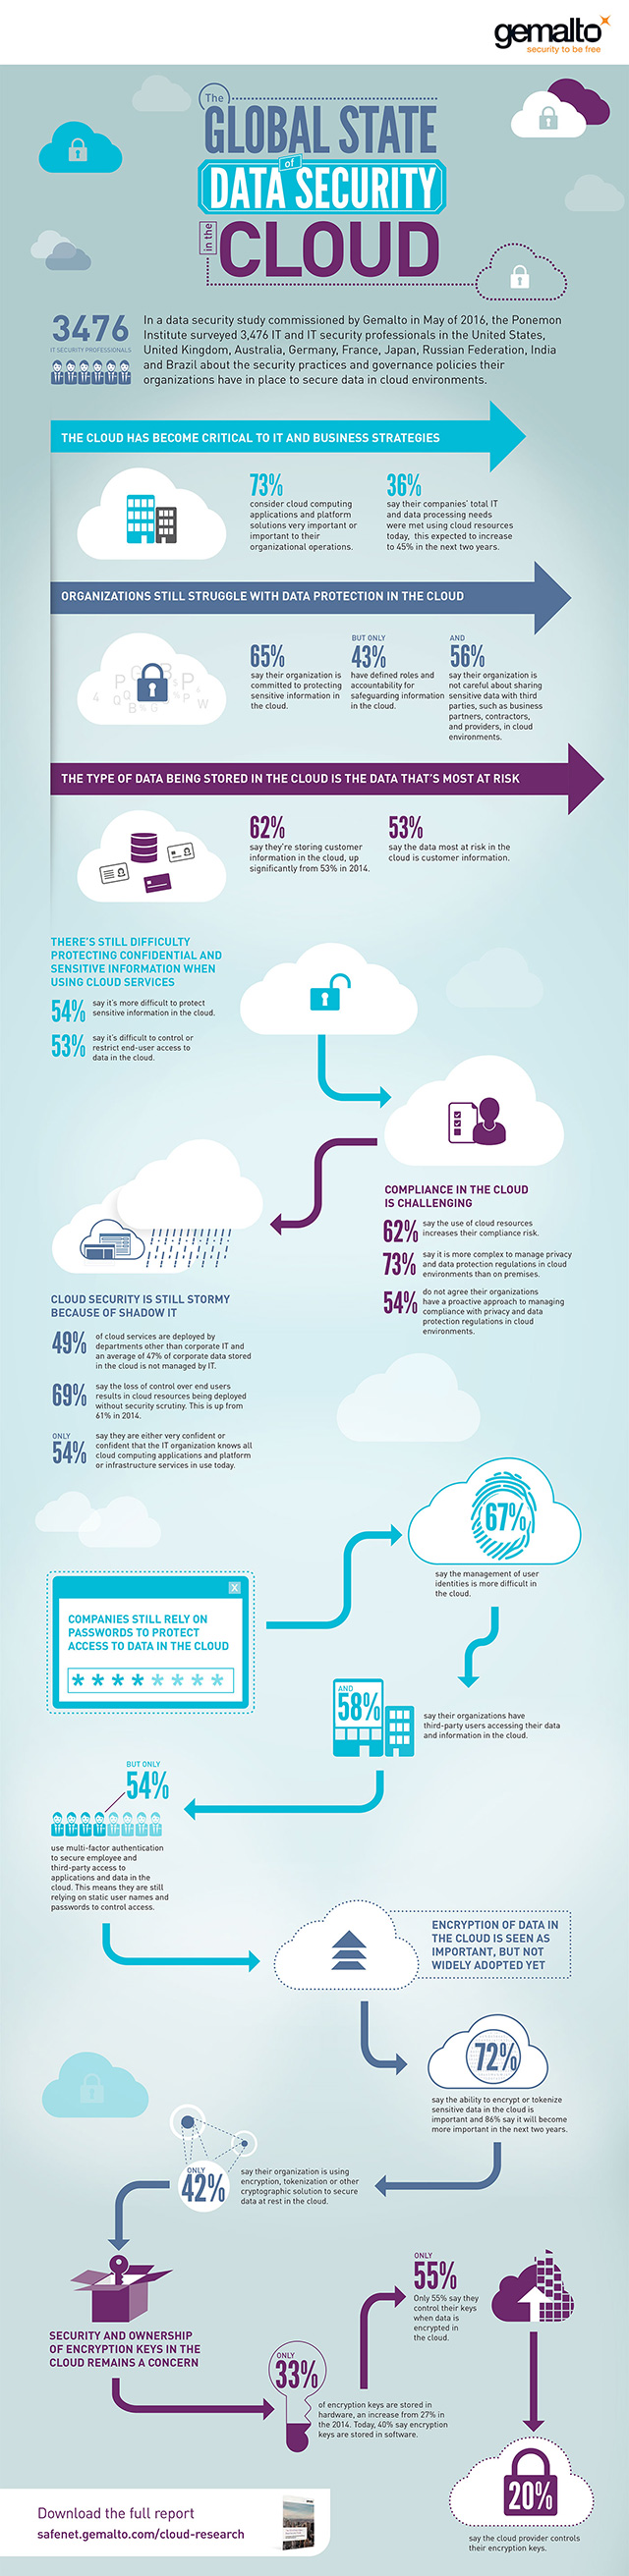 Cloud Data Security Trends in 2016 Infographic